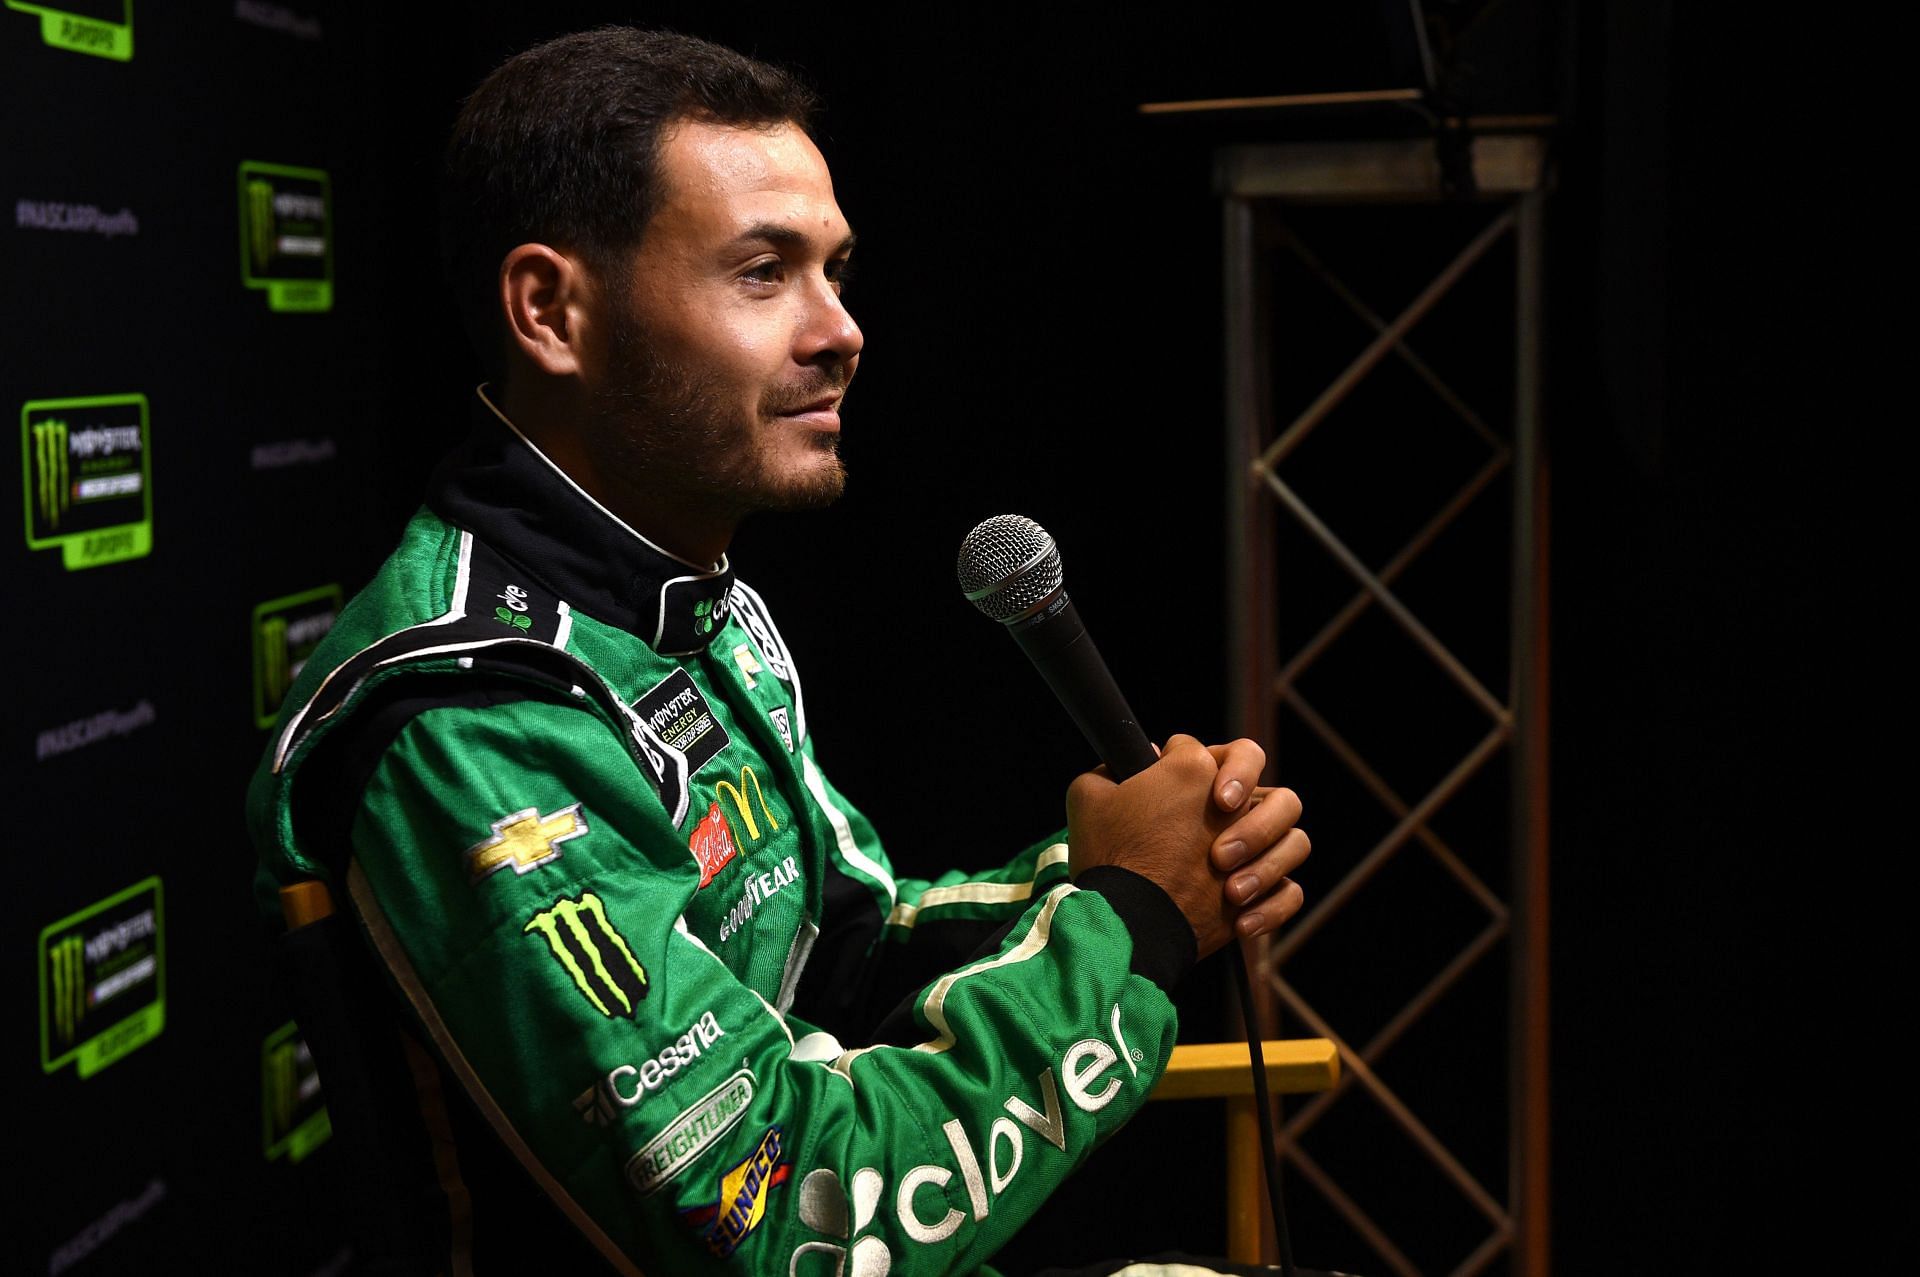 Kyle Larson is the only driver who is locked into the 2021 Championship 4 Round at Phoenix Raceway in any of NASCAR&#039;s top three divisions. (Photo by David Becker/Getty Images)